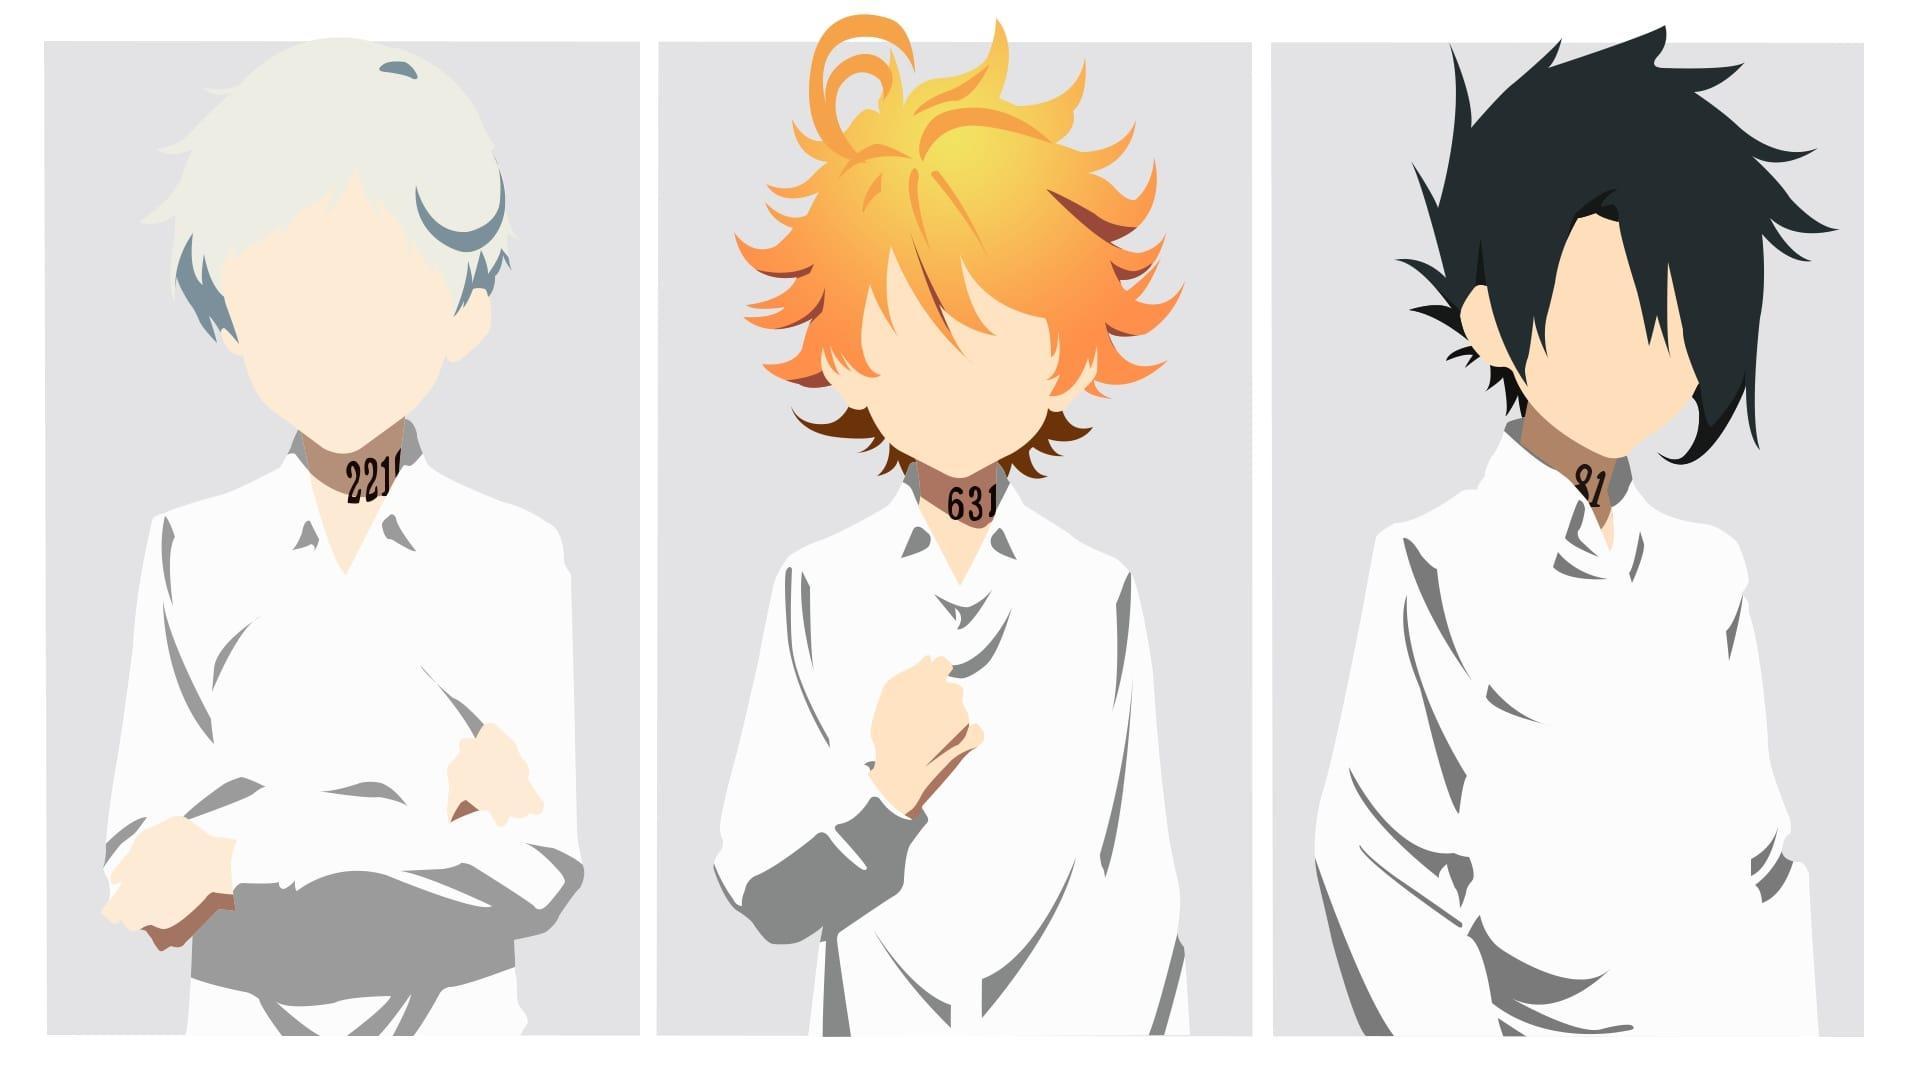 The Promised Neverland Hd Wallpaper 4k Download Full Screen, The Promised Neverland, Anime